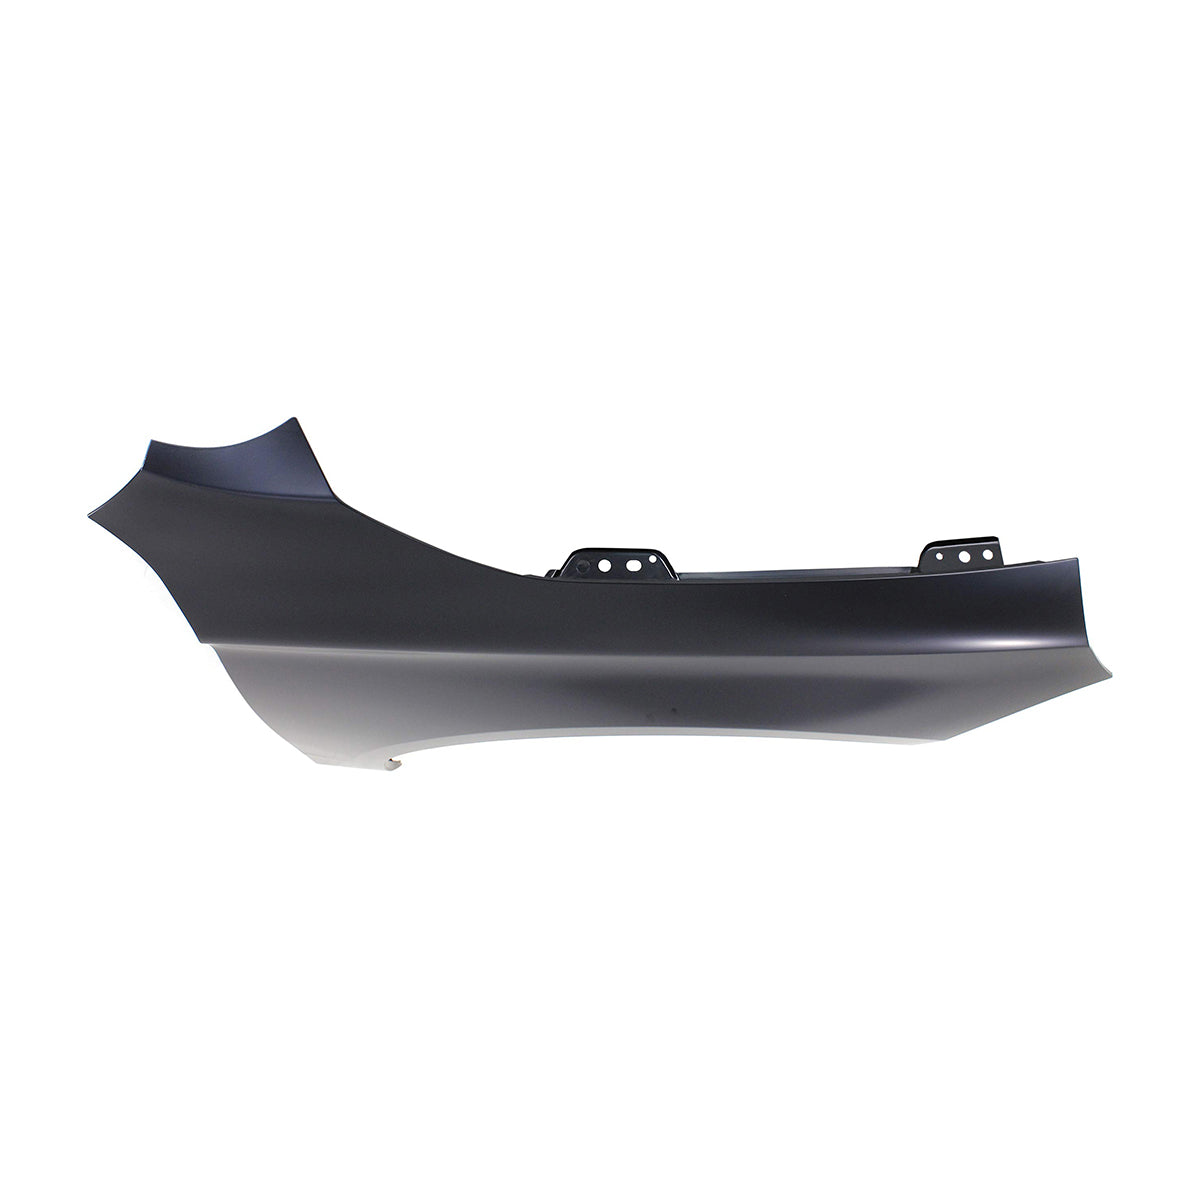 Replacement FRONT FENDER, RH, 2014-2020 Chevrolet Impala, 23151661, (Steel)